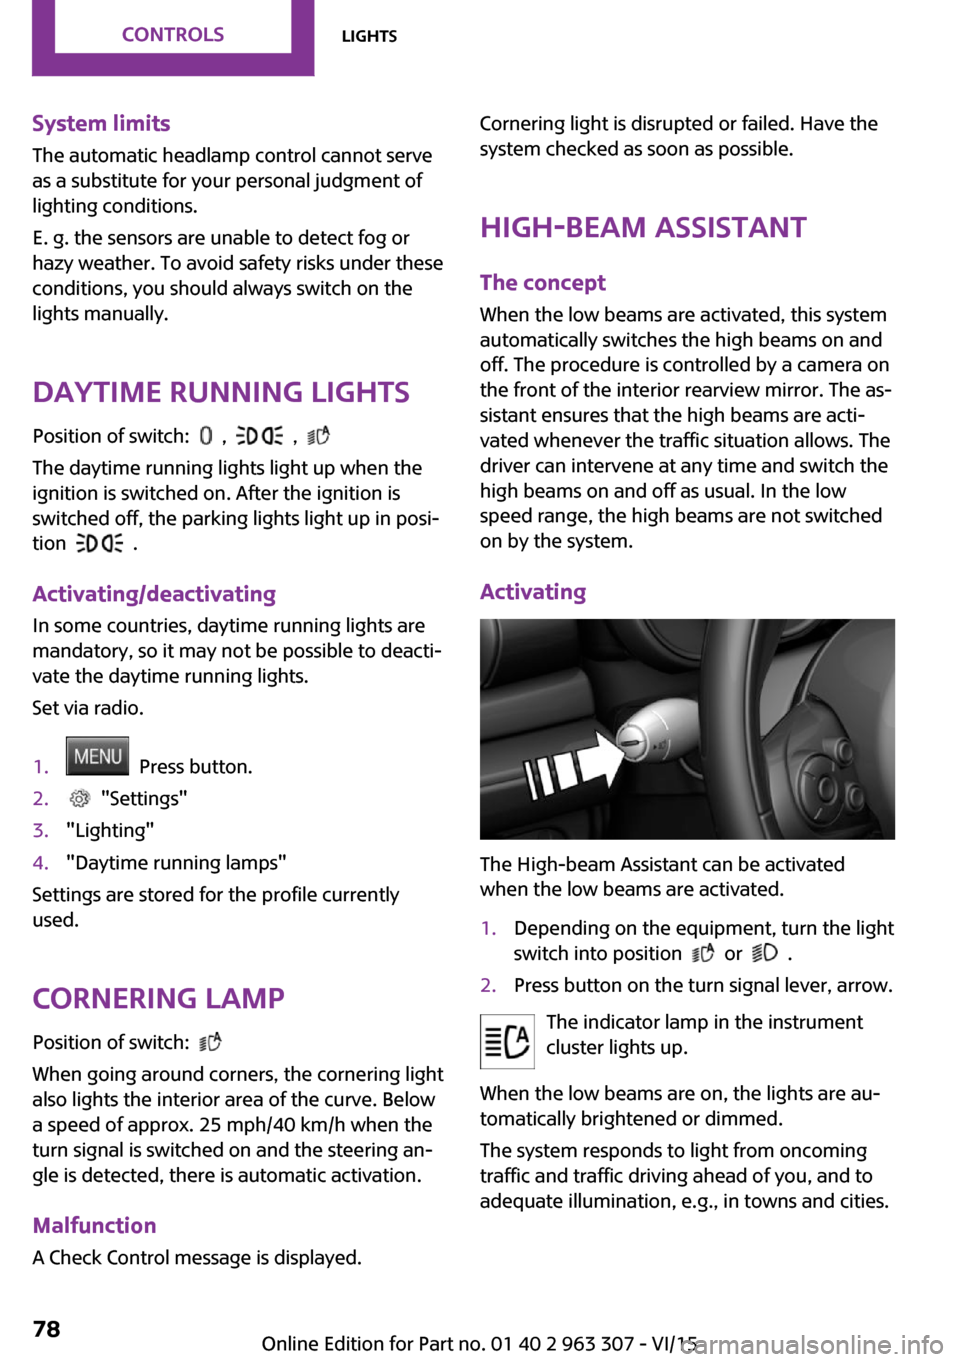 MINI Hardtop 4 Door 2016  Owners Manual System limits
The automatic headlamp control cannot serve
as a substitute for your personal judgment of
lighting conditions.
E. g. the sensors are unable to detect fog or
hazy weather. To avoid safety